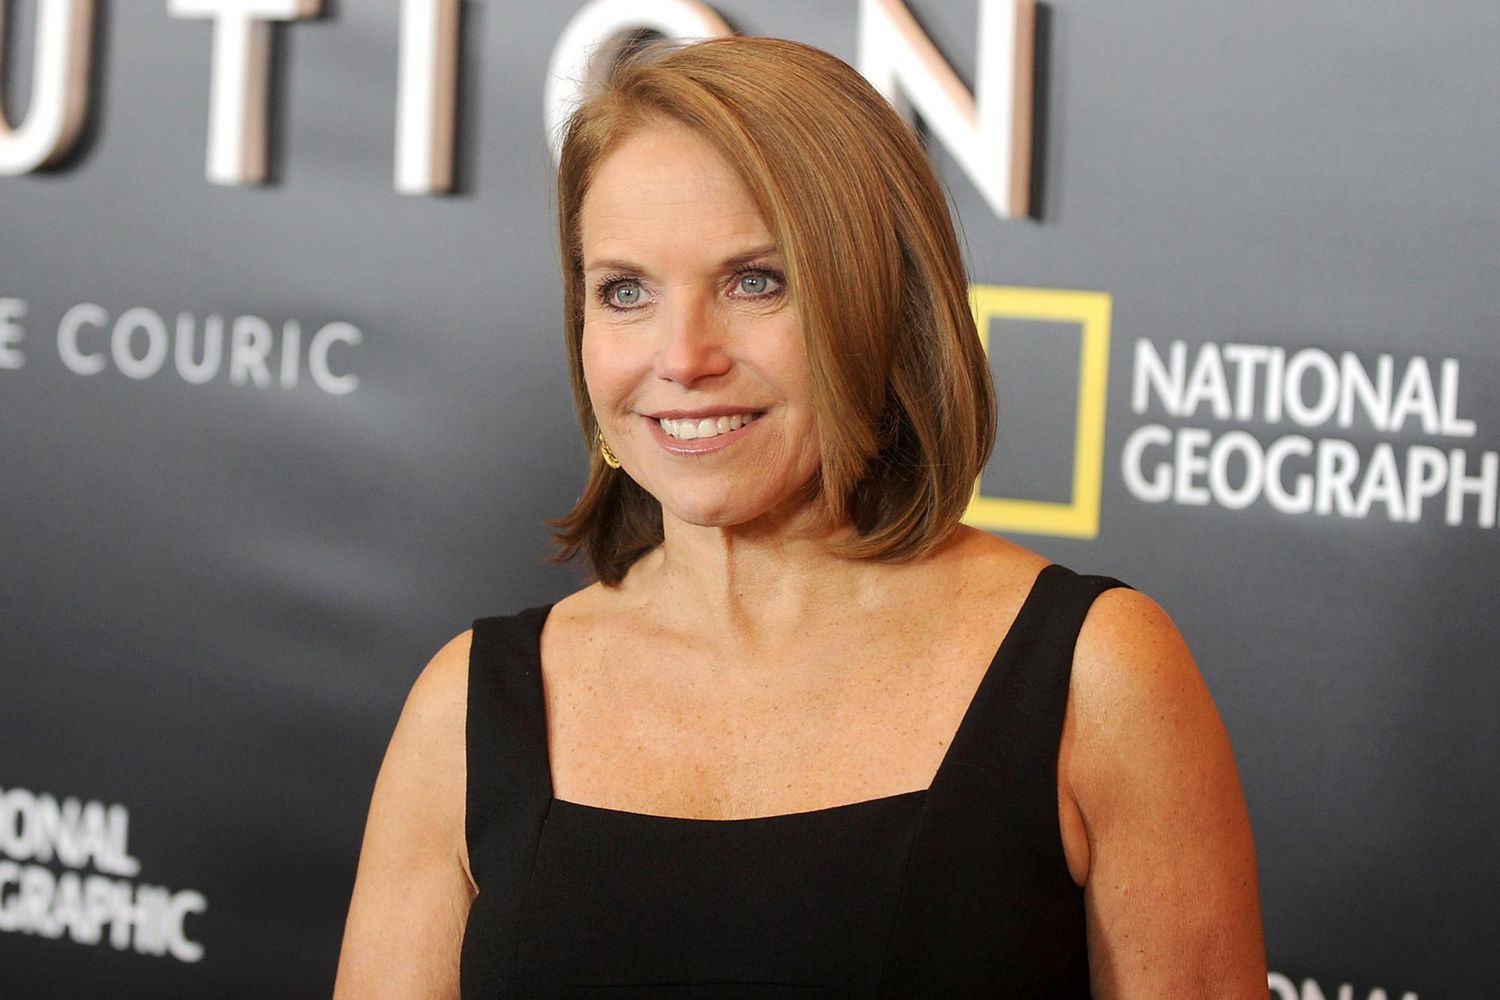 National Geographic Hosts World Premiere Screening Of "Gender Revolution: A Journey With Katie Couric"